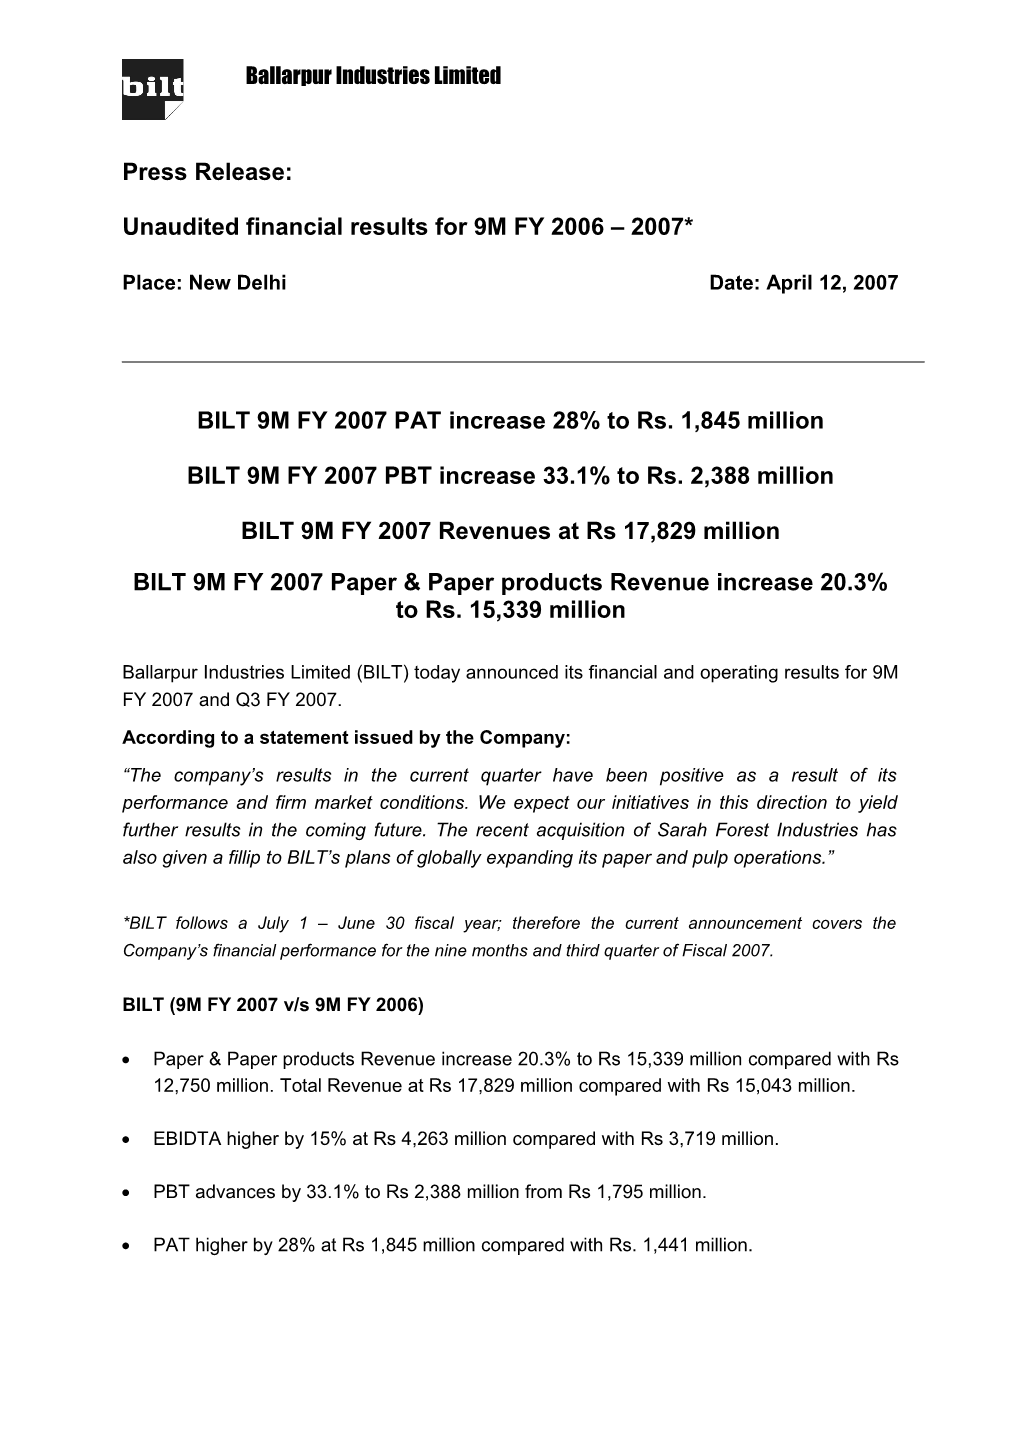 Unaudited Financial Results for 9M FY 2006 2007*